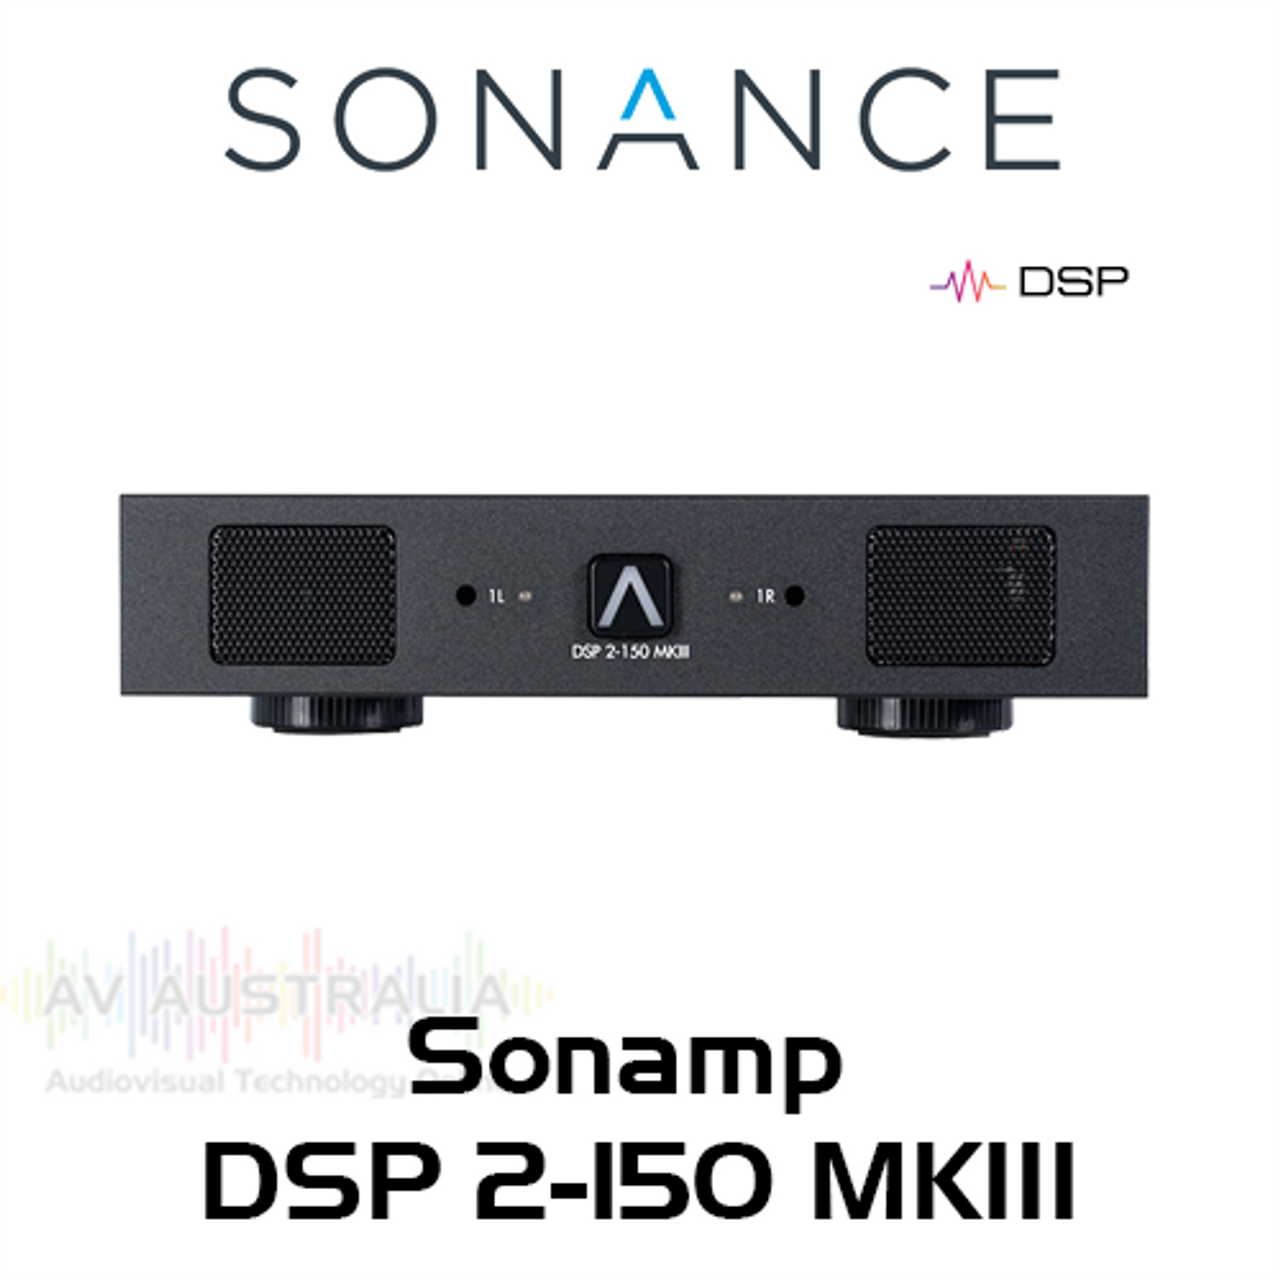 Sonance Sonamp DSP-2-150MKIII 2-Ch 150W Power Amplifier with DSP